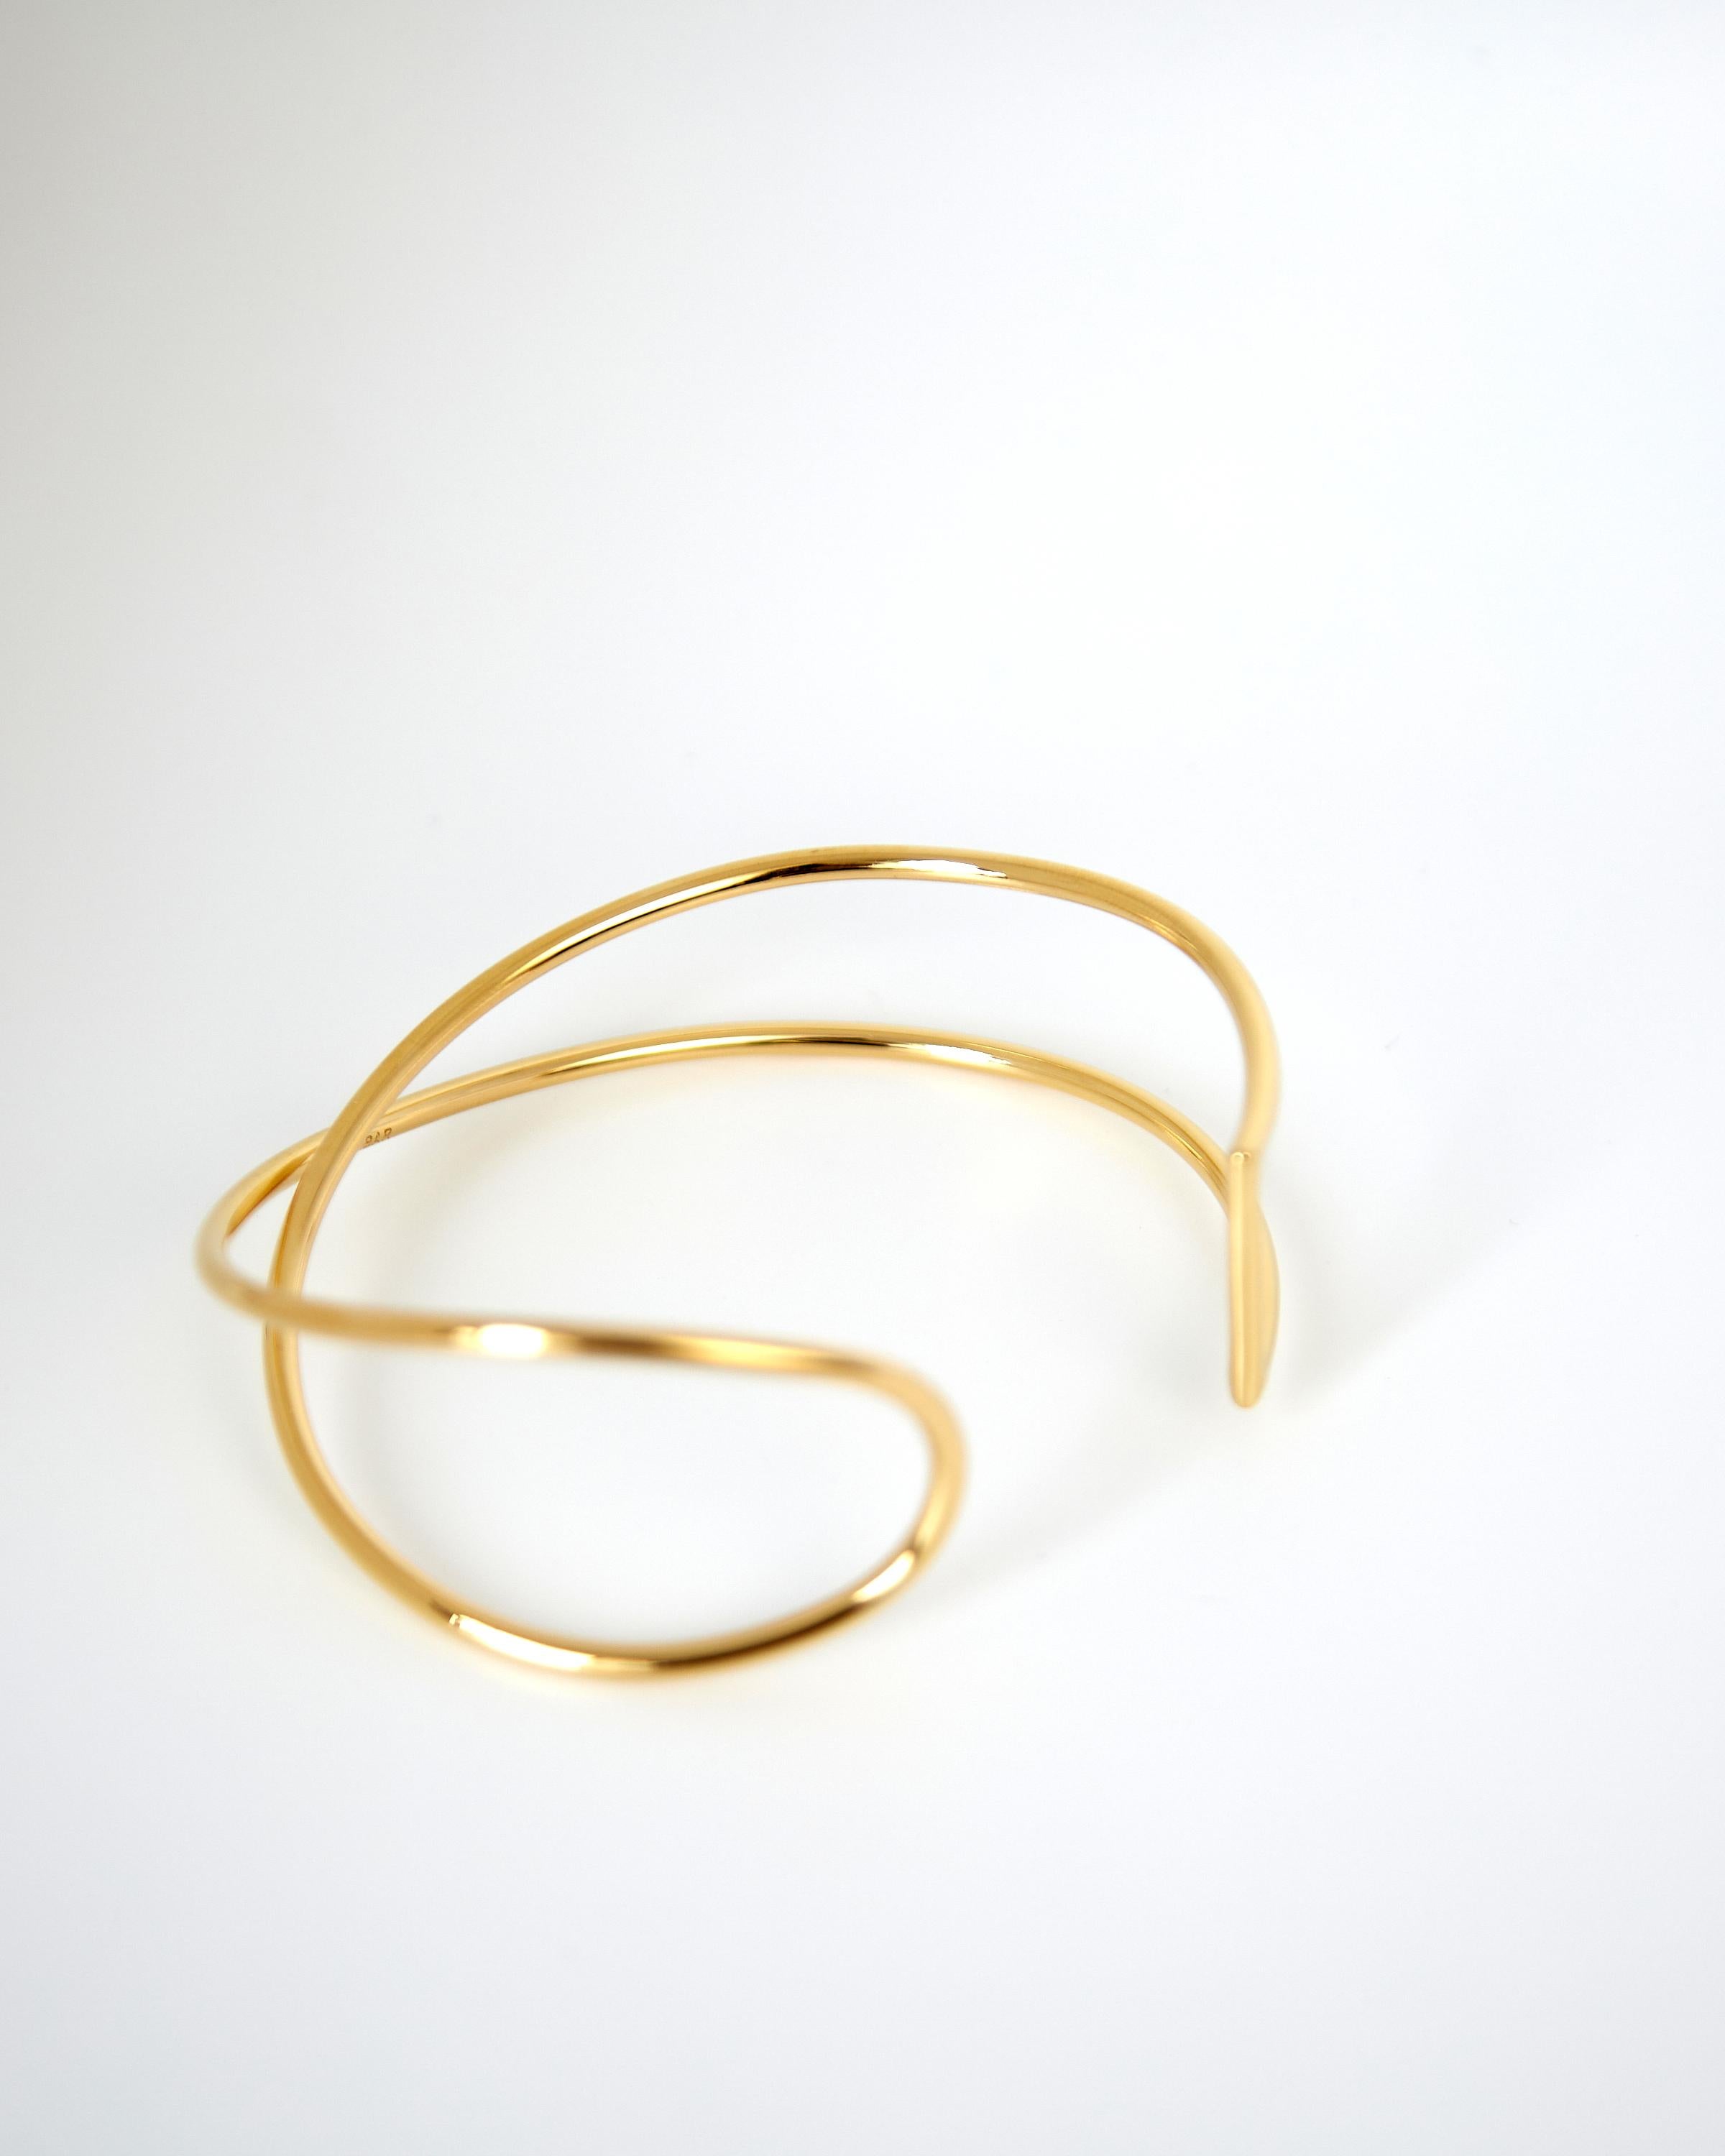 Modernist Sculptural Wire Bangle, 18 Carat Gold Plated Recycled Brass  For Sale